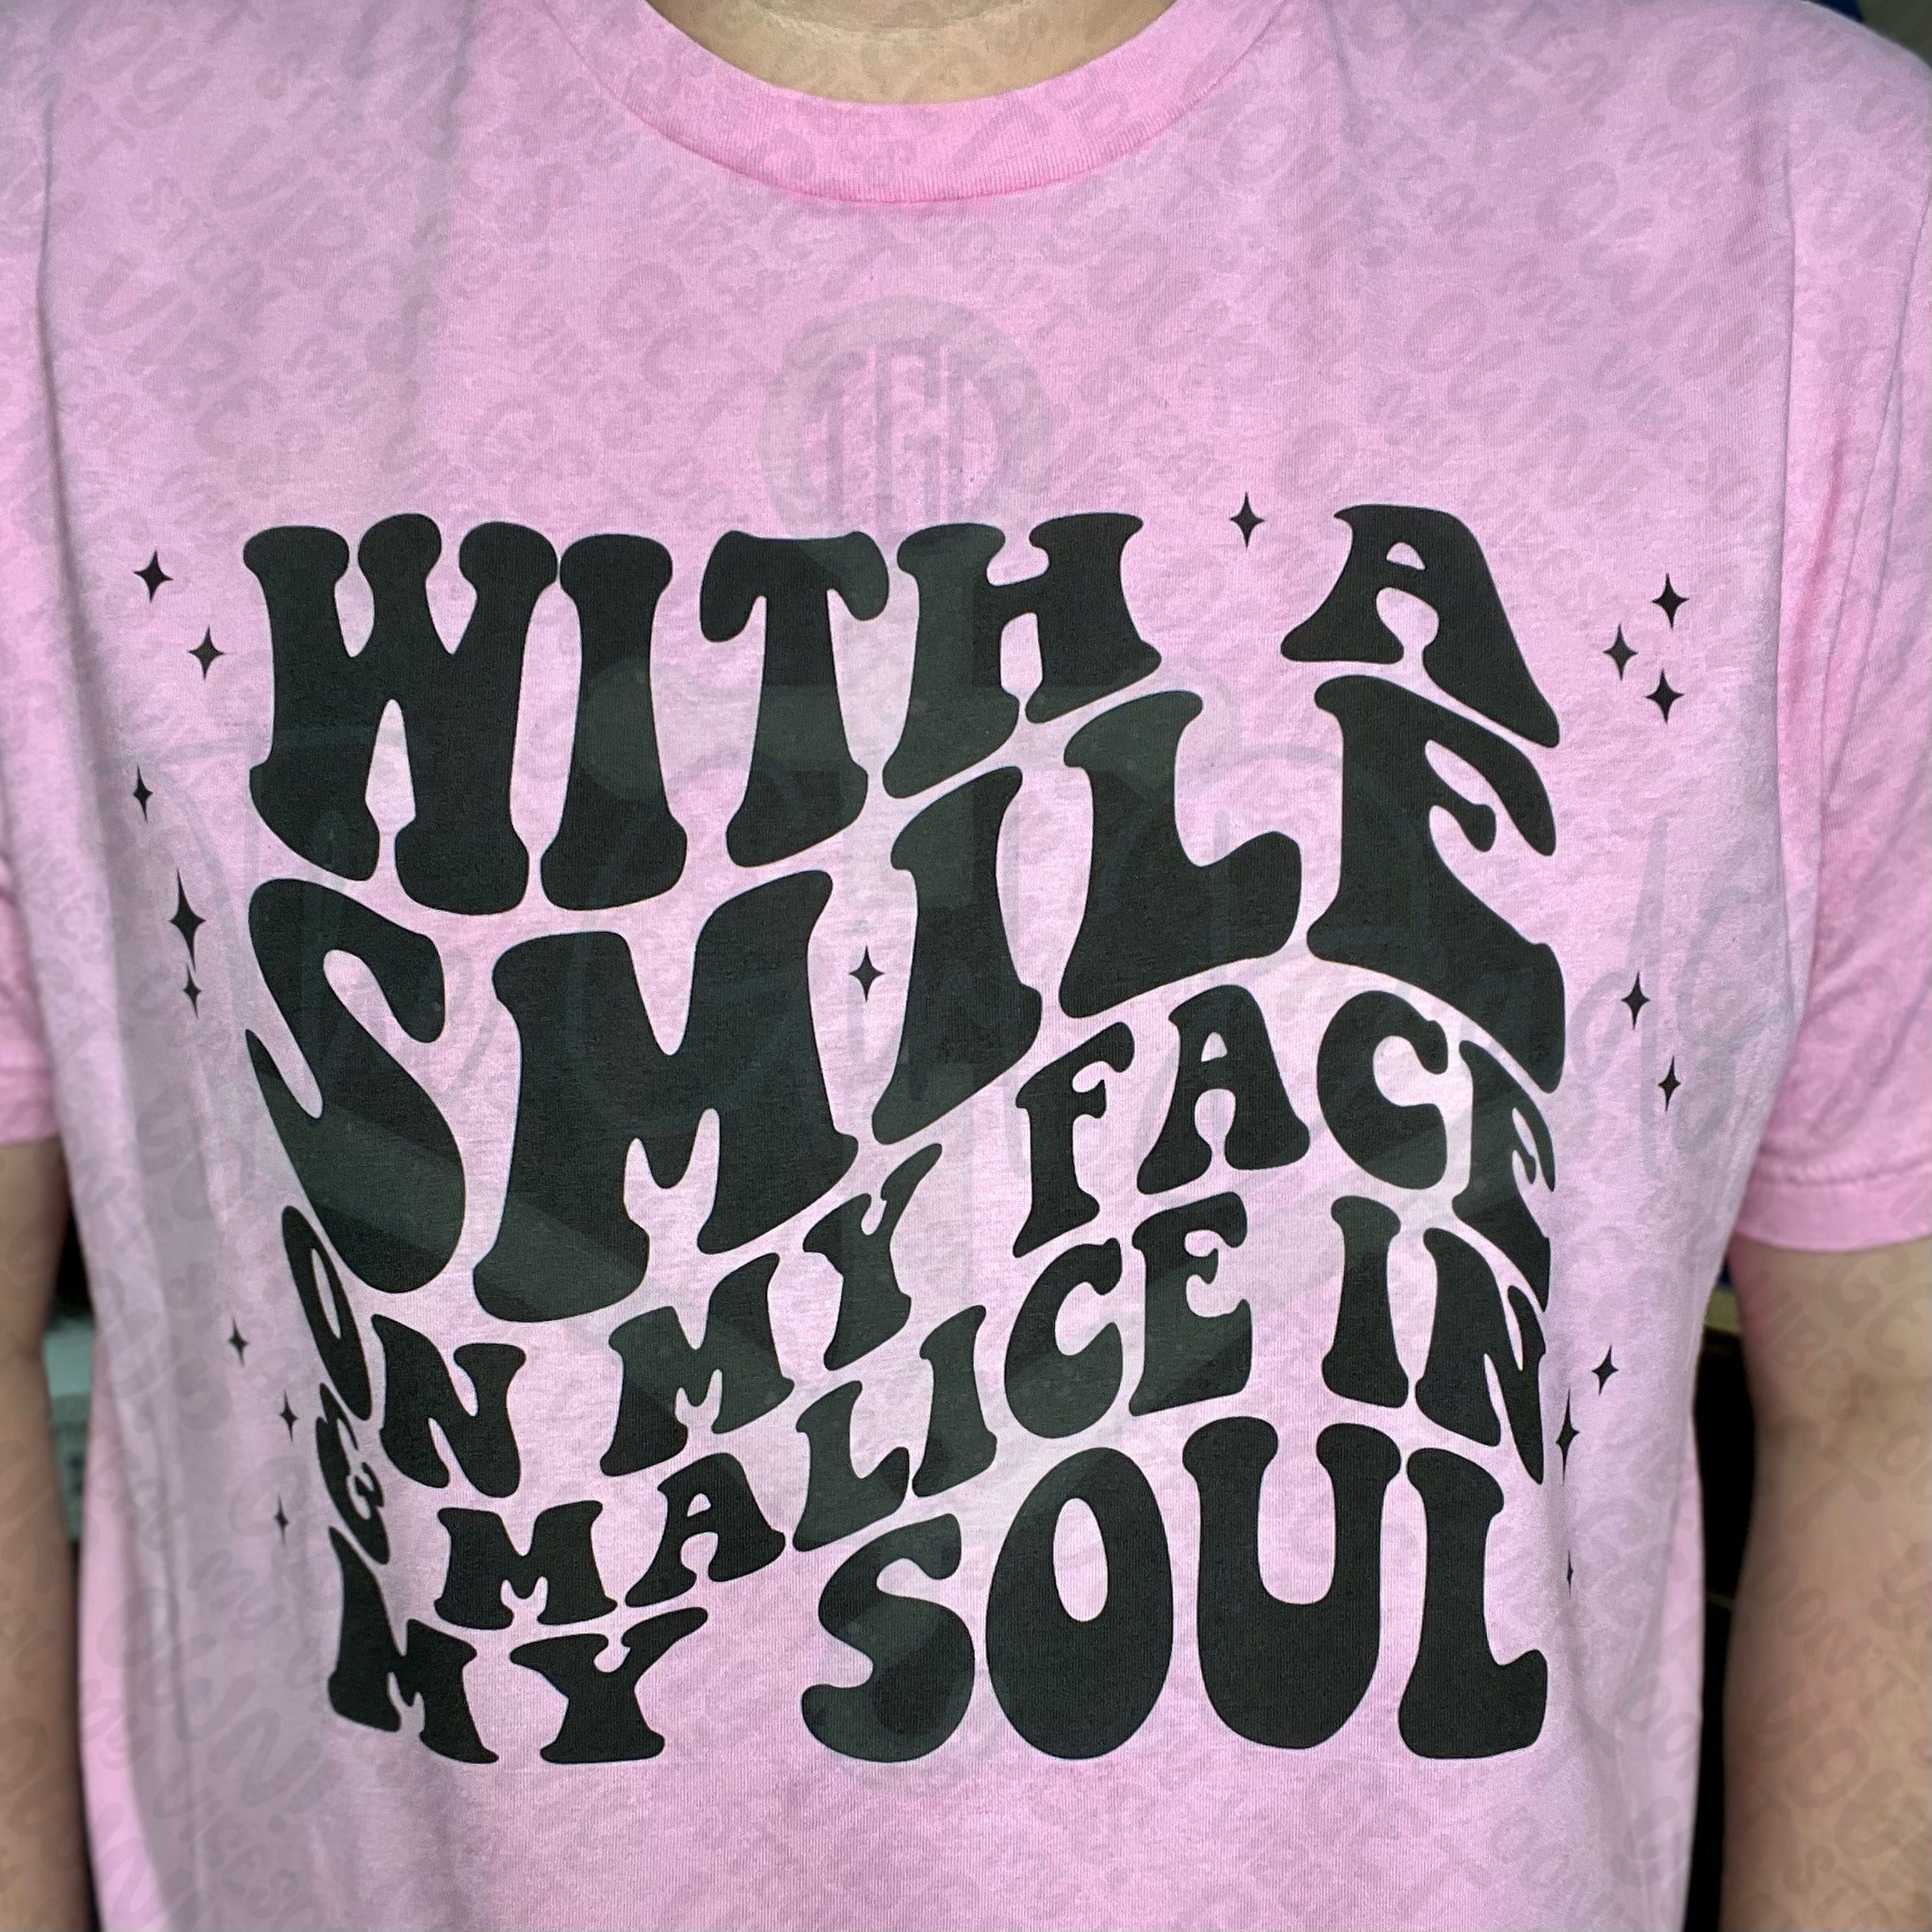 With A Smile On My Face & Malice In My Soul Top Design